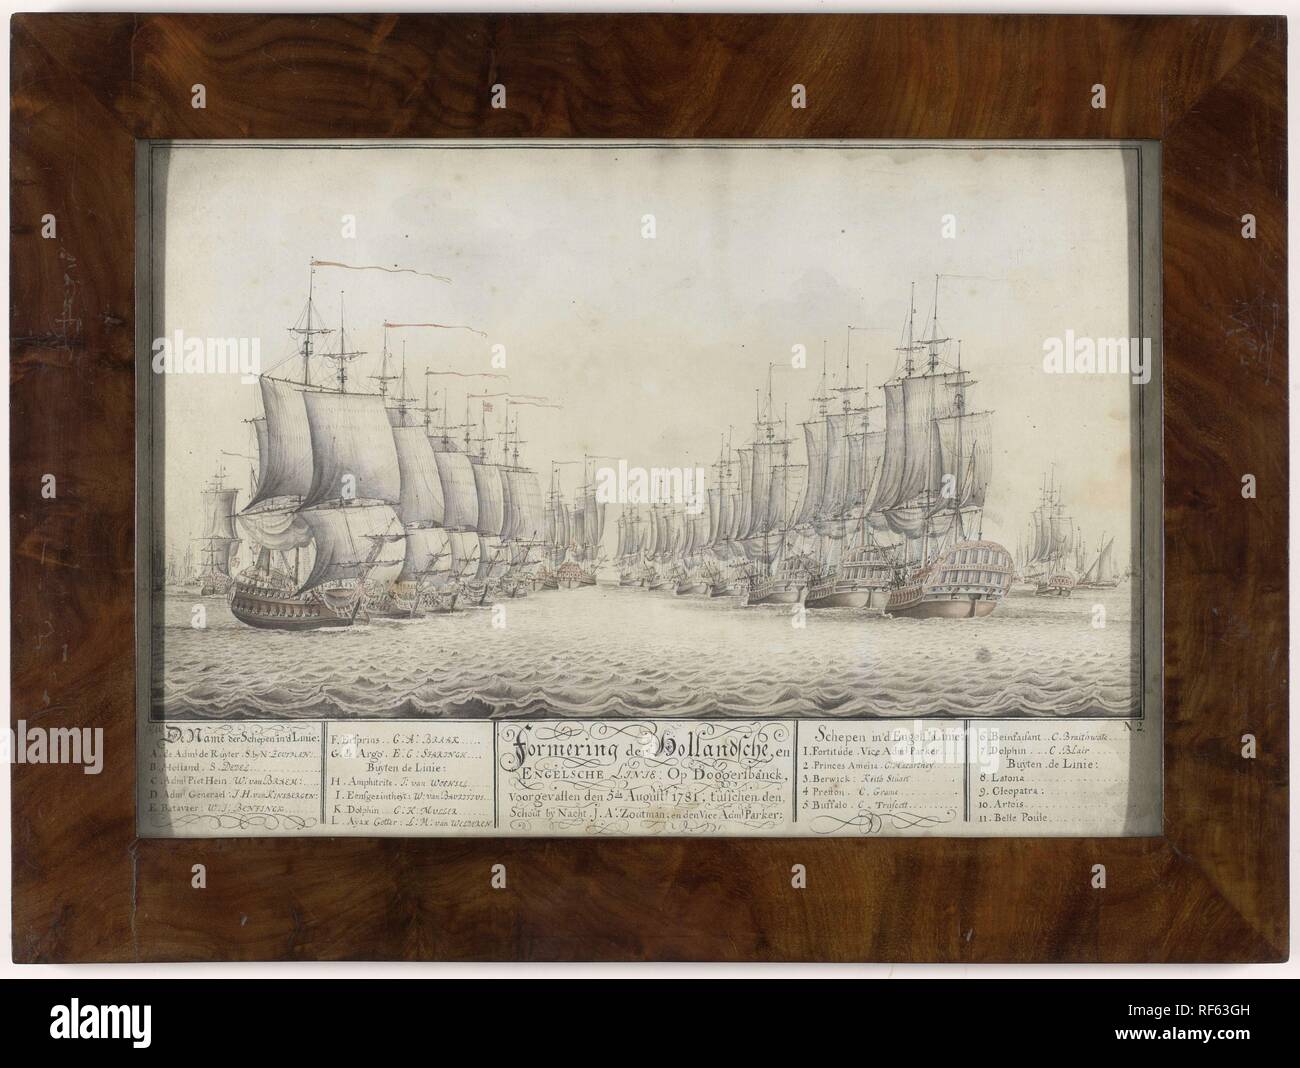 The Action off Dogger Bank (5 August 1781). Draughtsman: J. Weuyster (signed by artist). Dating: 1783. Place: Netherlands. Measurements: frame: h 48 cm × w 64.5 cm × t 2.1 cm; image: h 29 cm × w 50.4 cm. Museum: Rijksmuseum, Amsterdam. Stock Photo